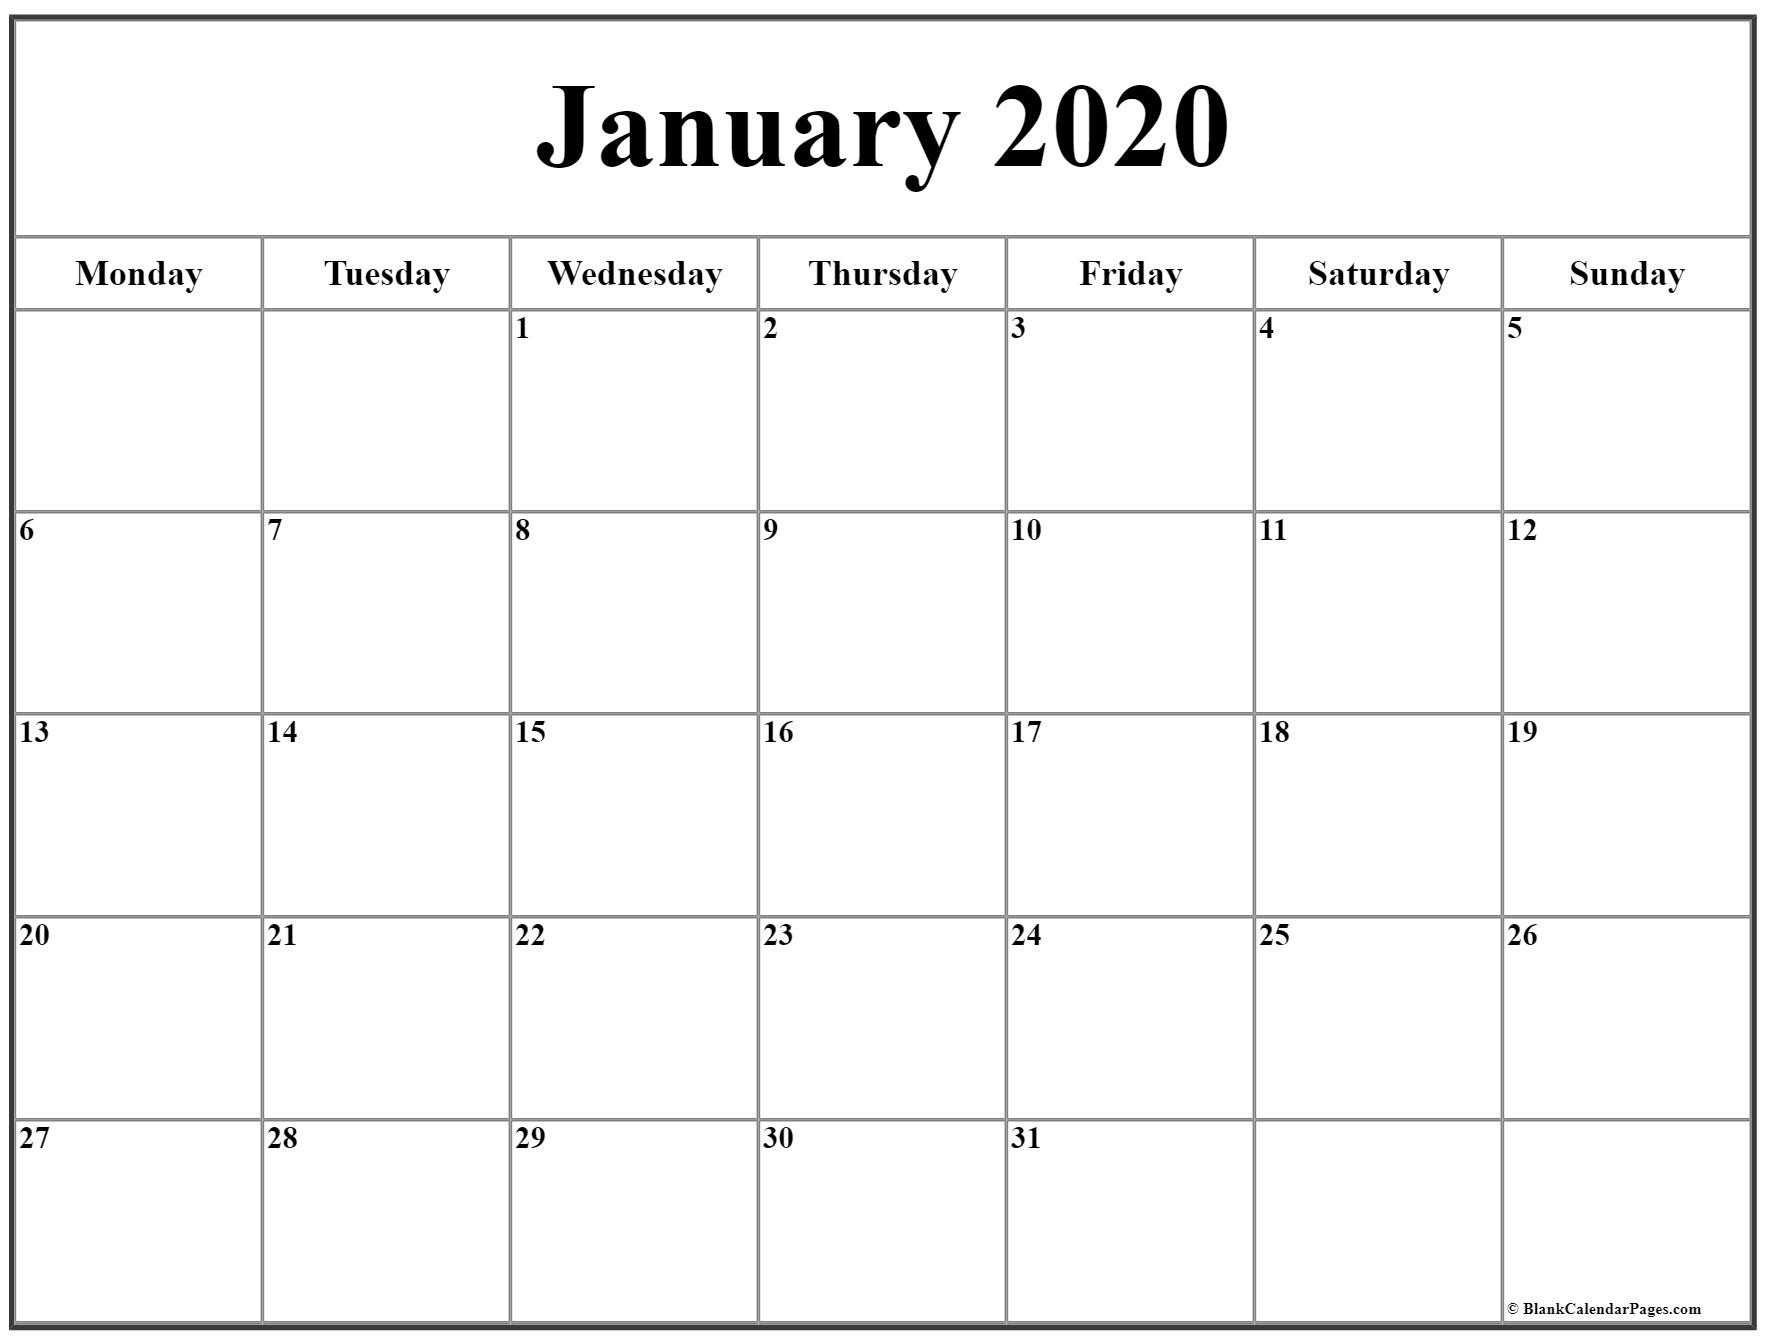 January 2020 Monday Calendar | Monday To Sunday-2020 Monday To Friday Schedule Template